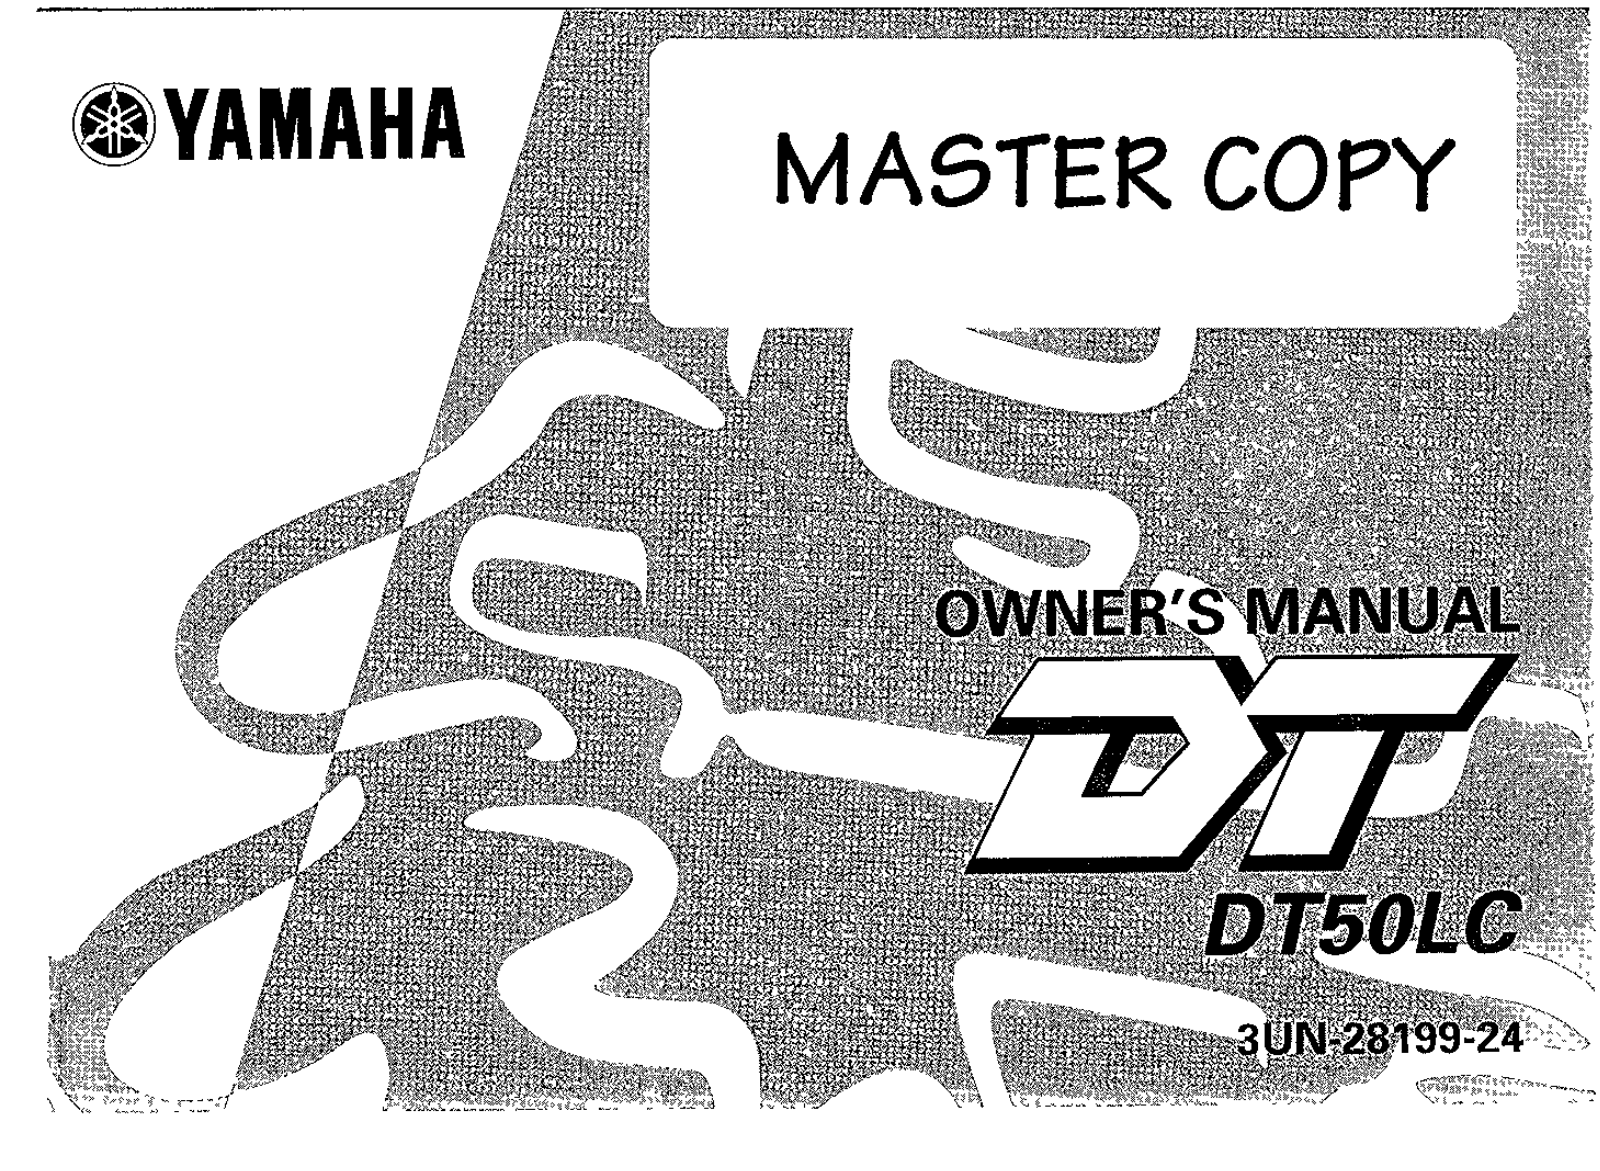 Yamaha DT50 LC 2001 Owner's manual